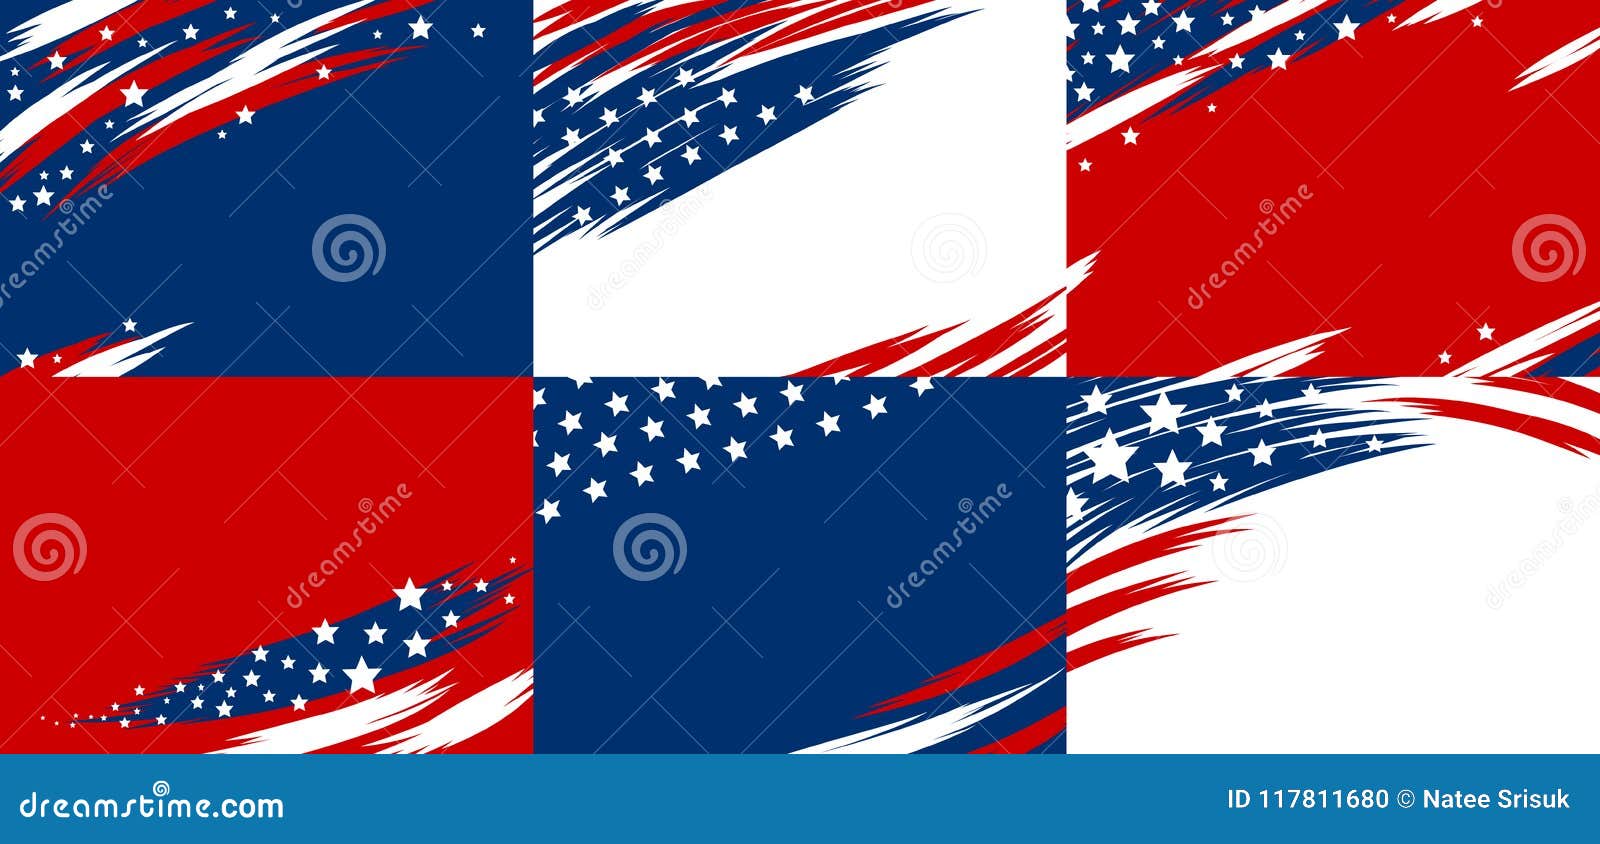 set of usa banner abstract background  of american flag